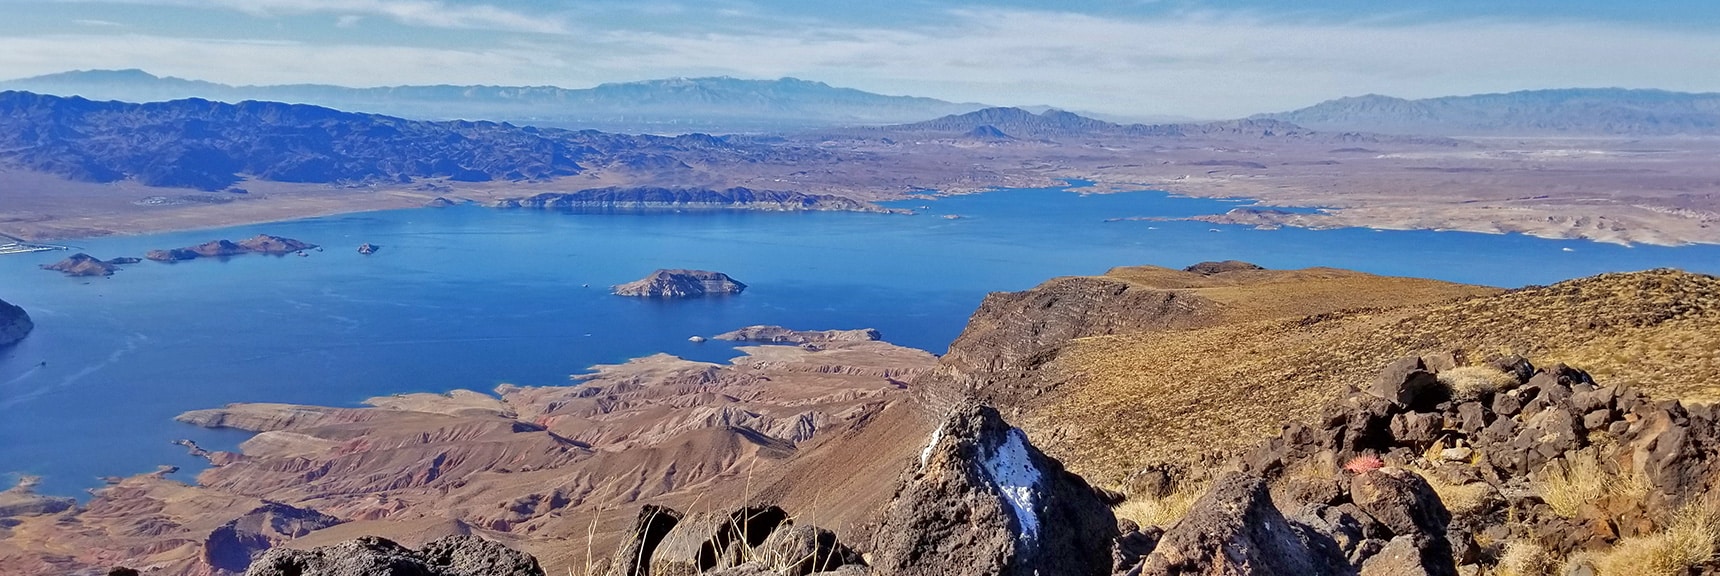 Lake Mead from Fortification Hill Summit | Fortification Hill | Lake Mead National Recreation Area, Arizona